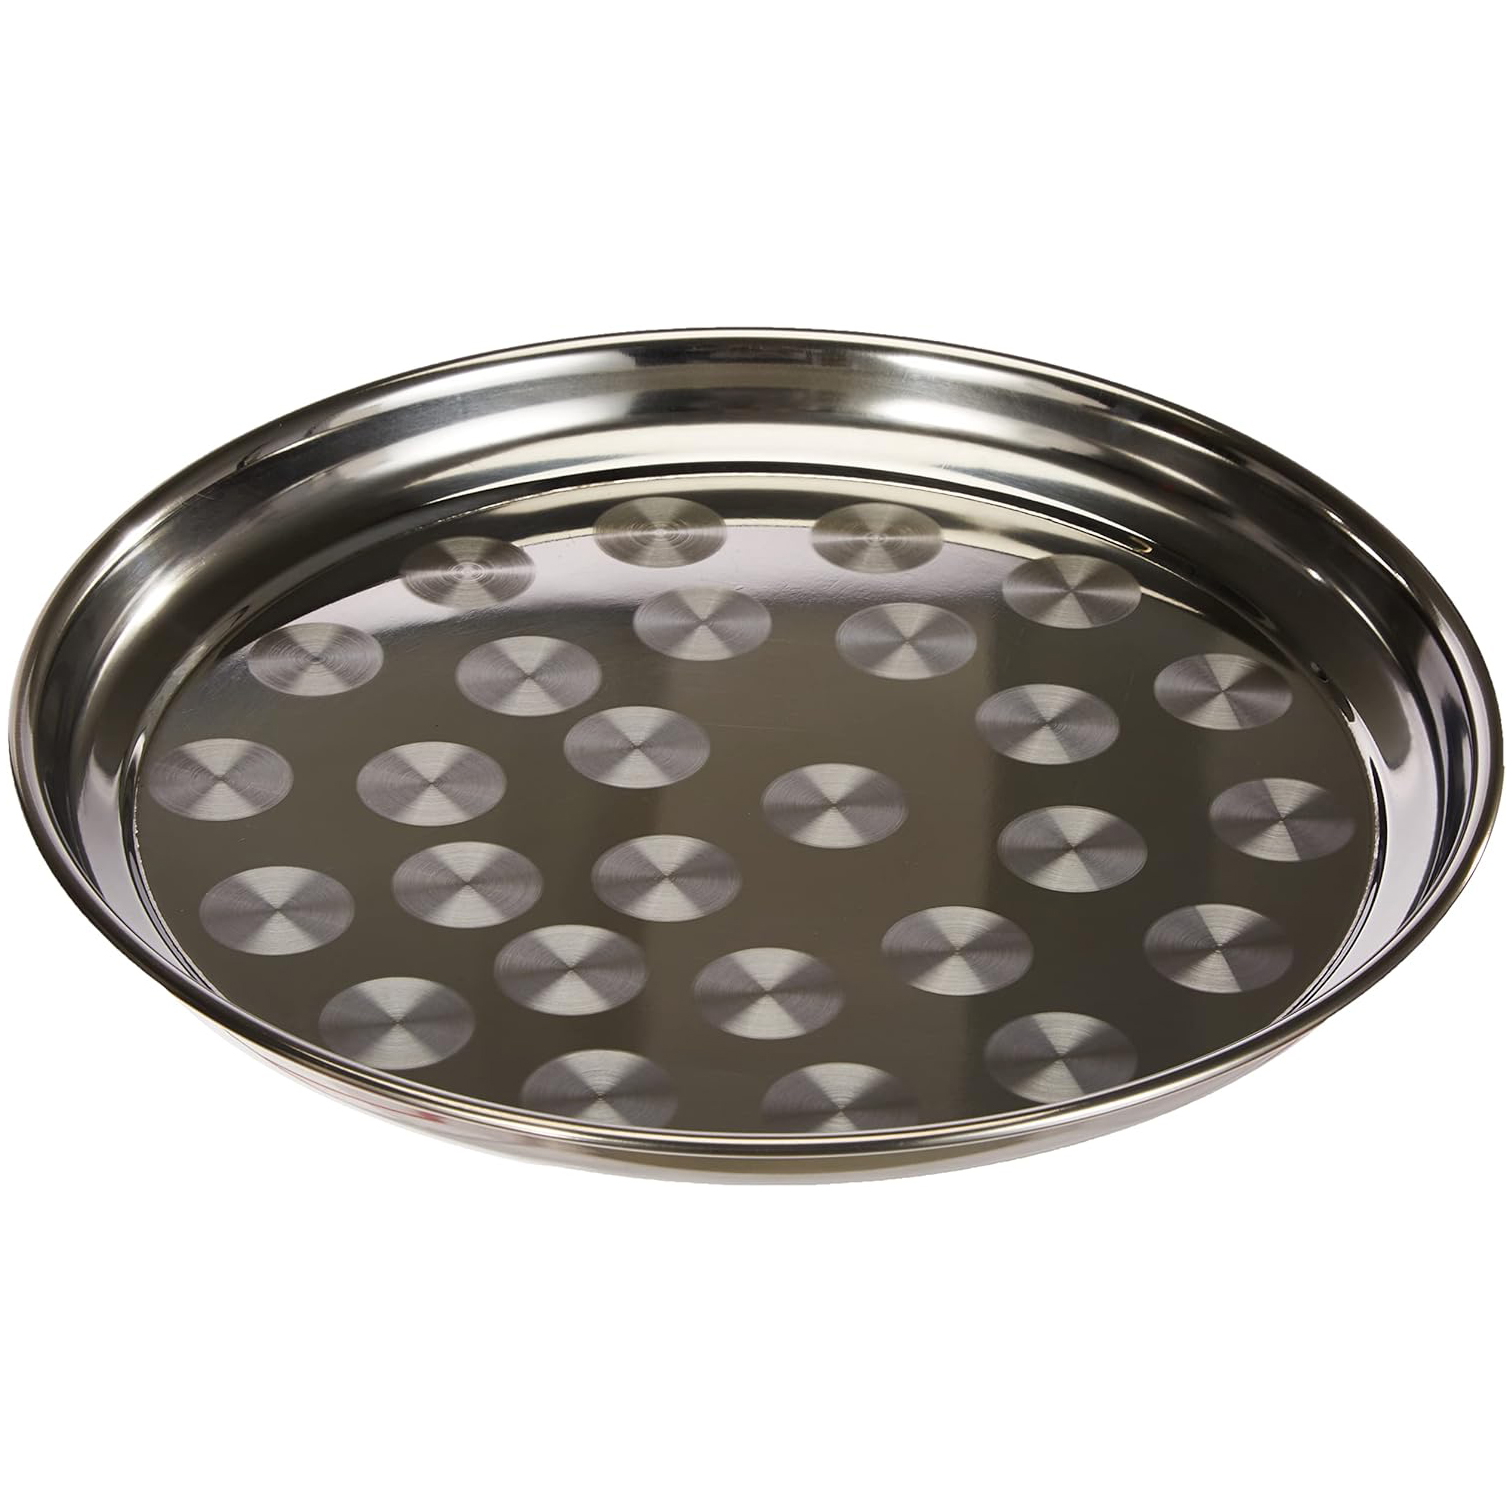 Stainless steel round tray with swirl pattern, serving/display tray 75cm